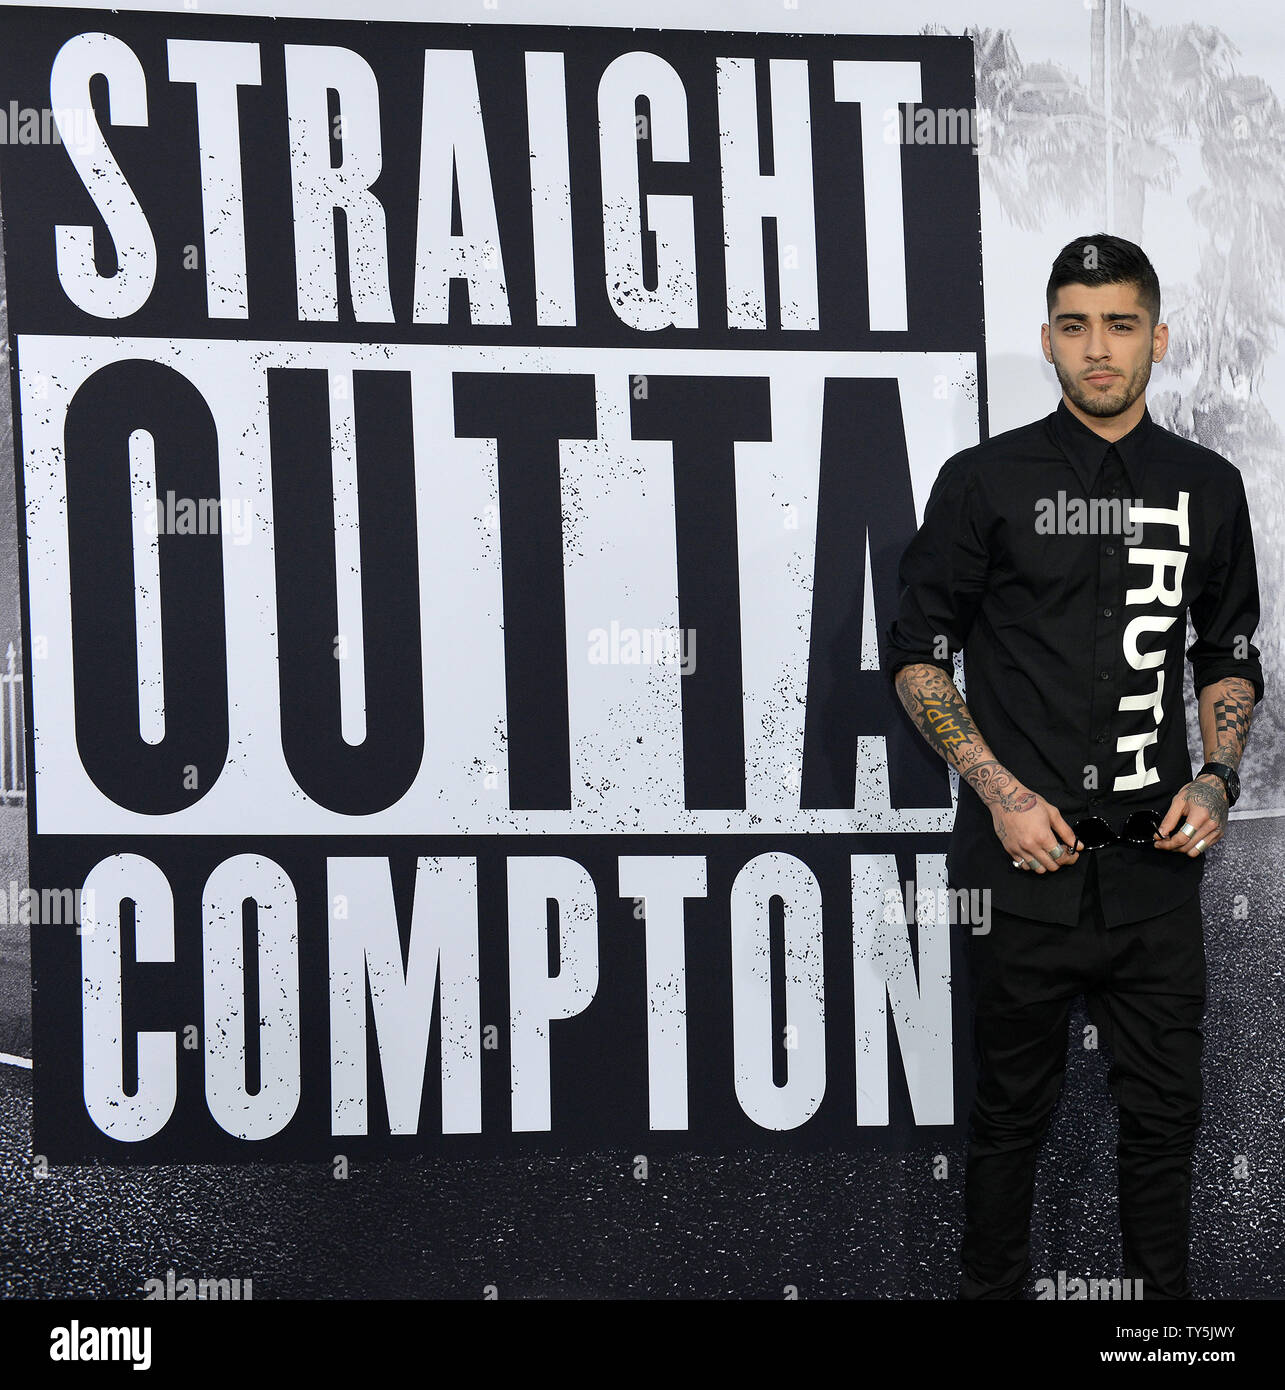 Singer Zayn Malik attends the premiere of the N.W.A. motion picture biopic 'Straight Outta Compton' at Microsoft Theater in Los Angeles on August 10, 2015. Storyline: The group NWA emerges from the streets of Compton, California in the mid-1980s and revolutionizes Hip Hop culture with their music and tales about life in the hood. Photo by Christine Chew/UPI Stock Photo